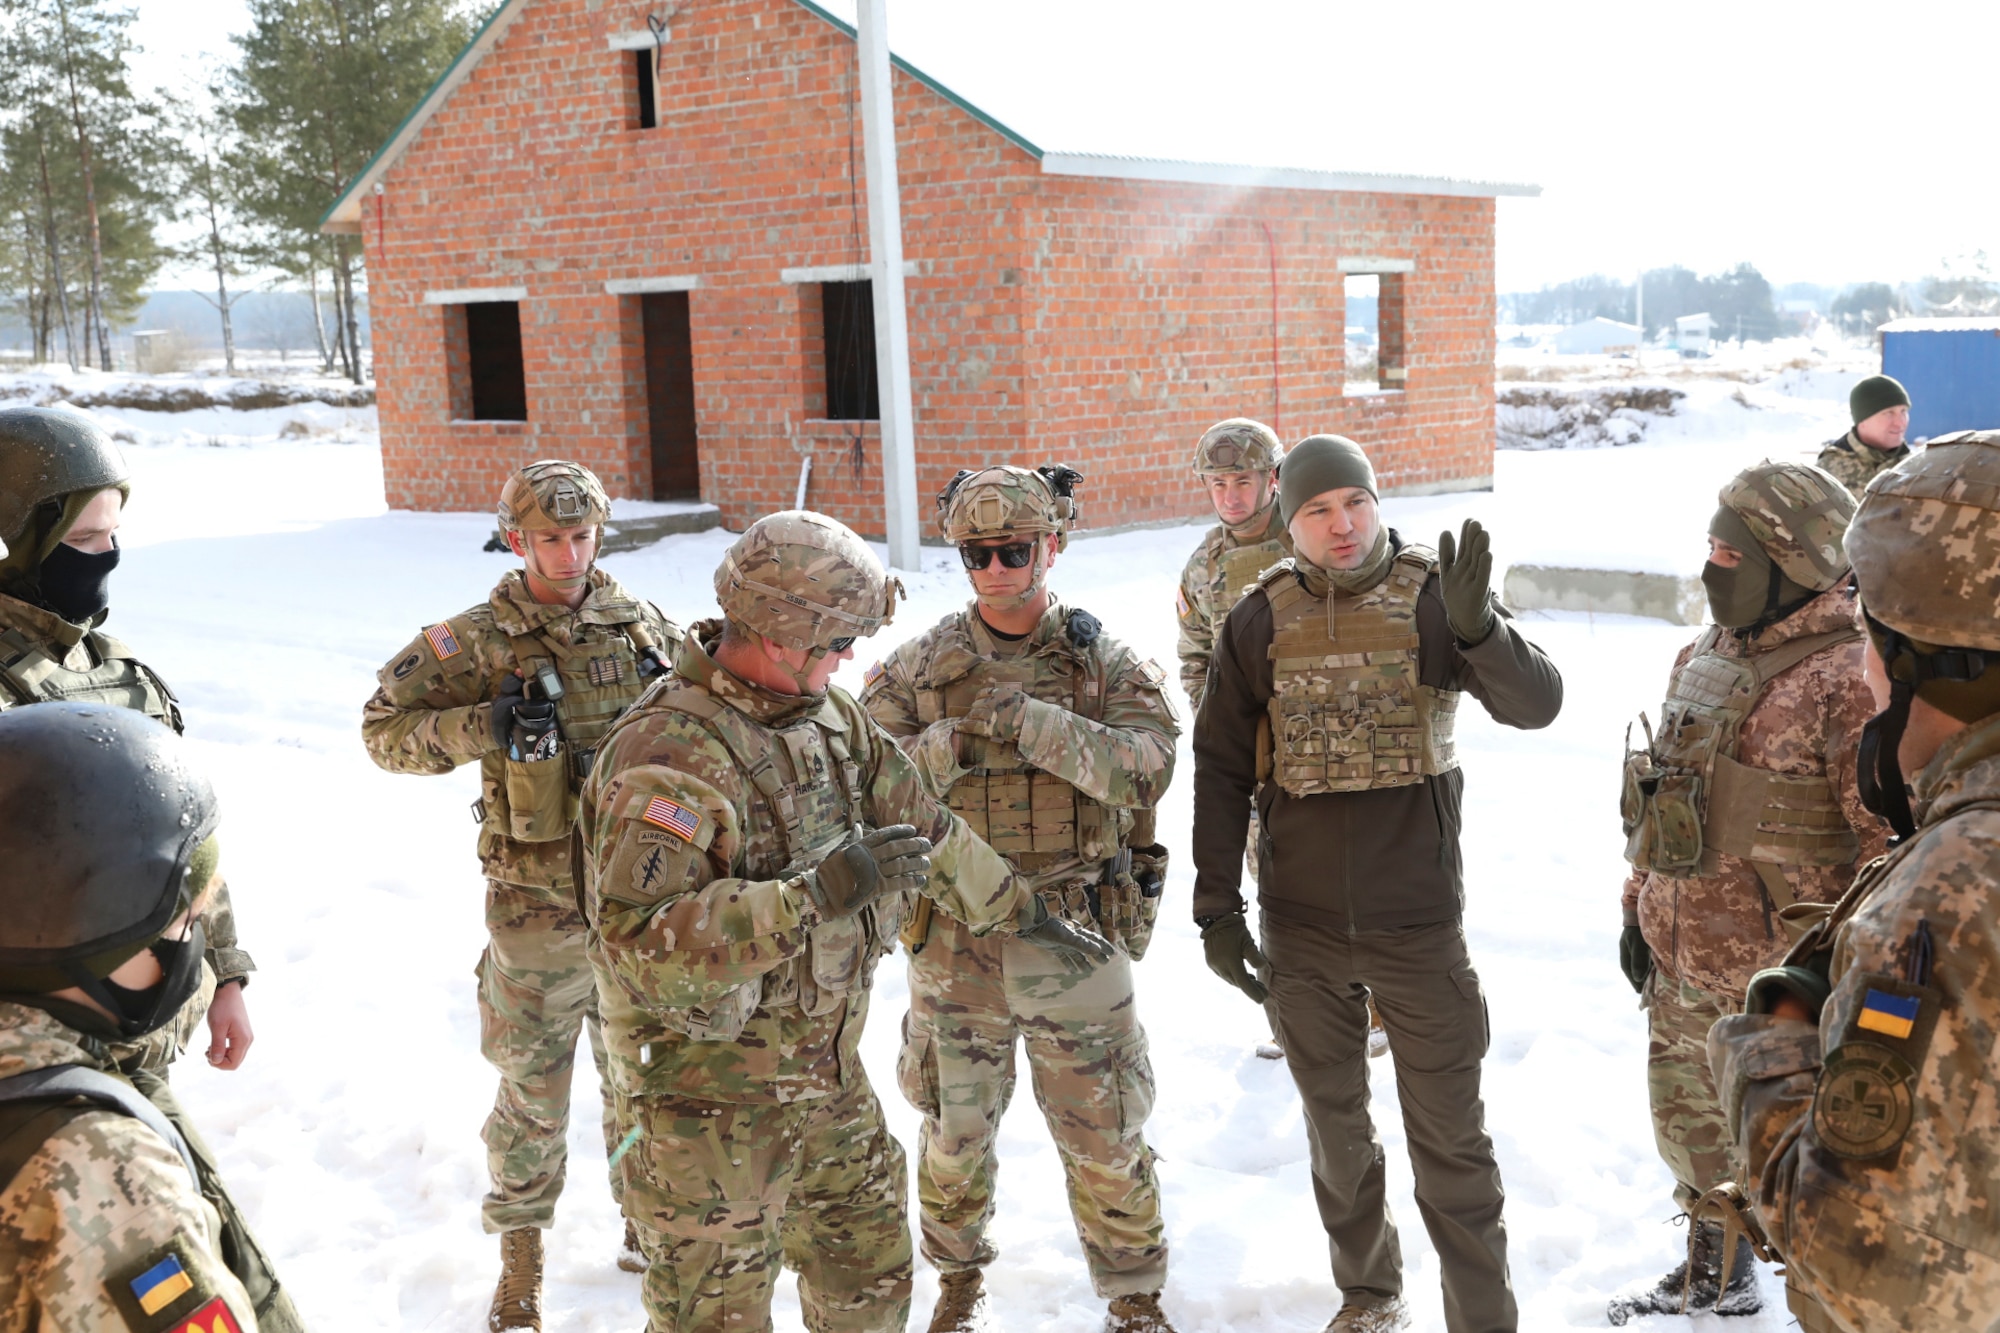 Sgt. 1st Class Jason Haigh, from Task Force Gator, 53rd Infantry Brigade Combat Team, Florida Army National Guard, currently assigned to Joint Multinational Training Group – Ukraine, provides an example while advising on teaching tactics with Ukrainian Observer Controller/Trainers at the International Peacekeeping and Security Center, Feb. 3, 2022. U.S. Soldiers provide advisory guidance on Combat Training Center-Yavoriv methodology and training doctrine development to their Ukrainian peers, furthering the self-sufficient training capabilities offered at IPSC to Ukrainian Armed Forces.